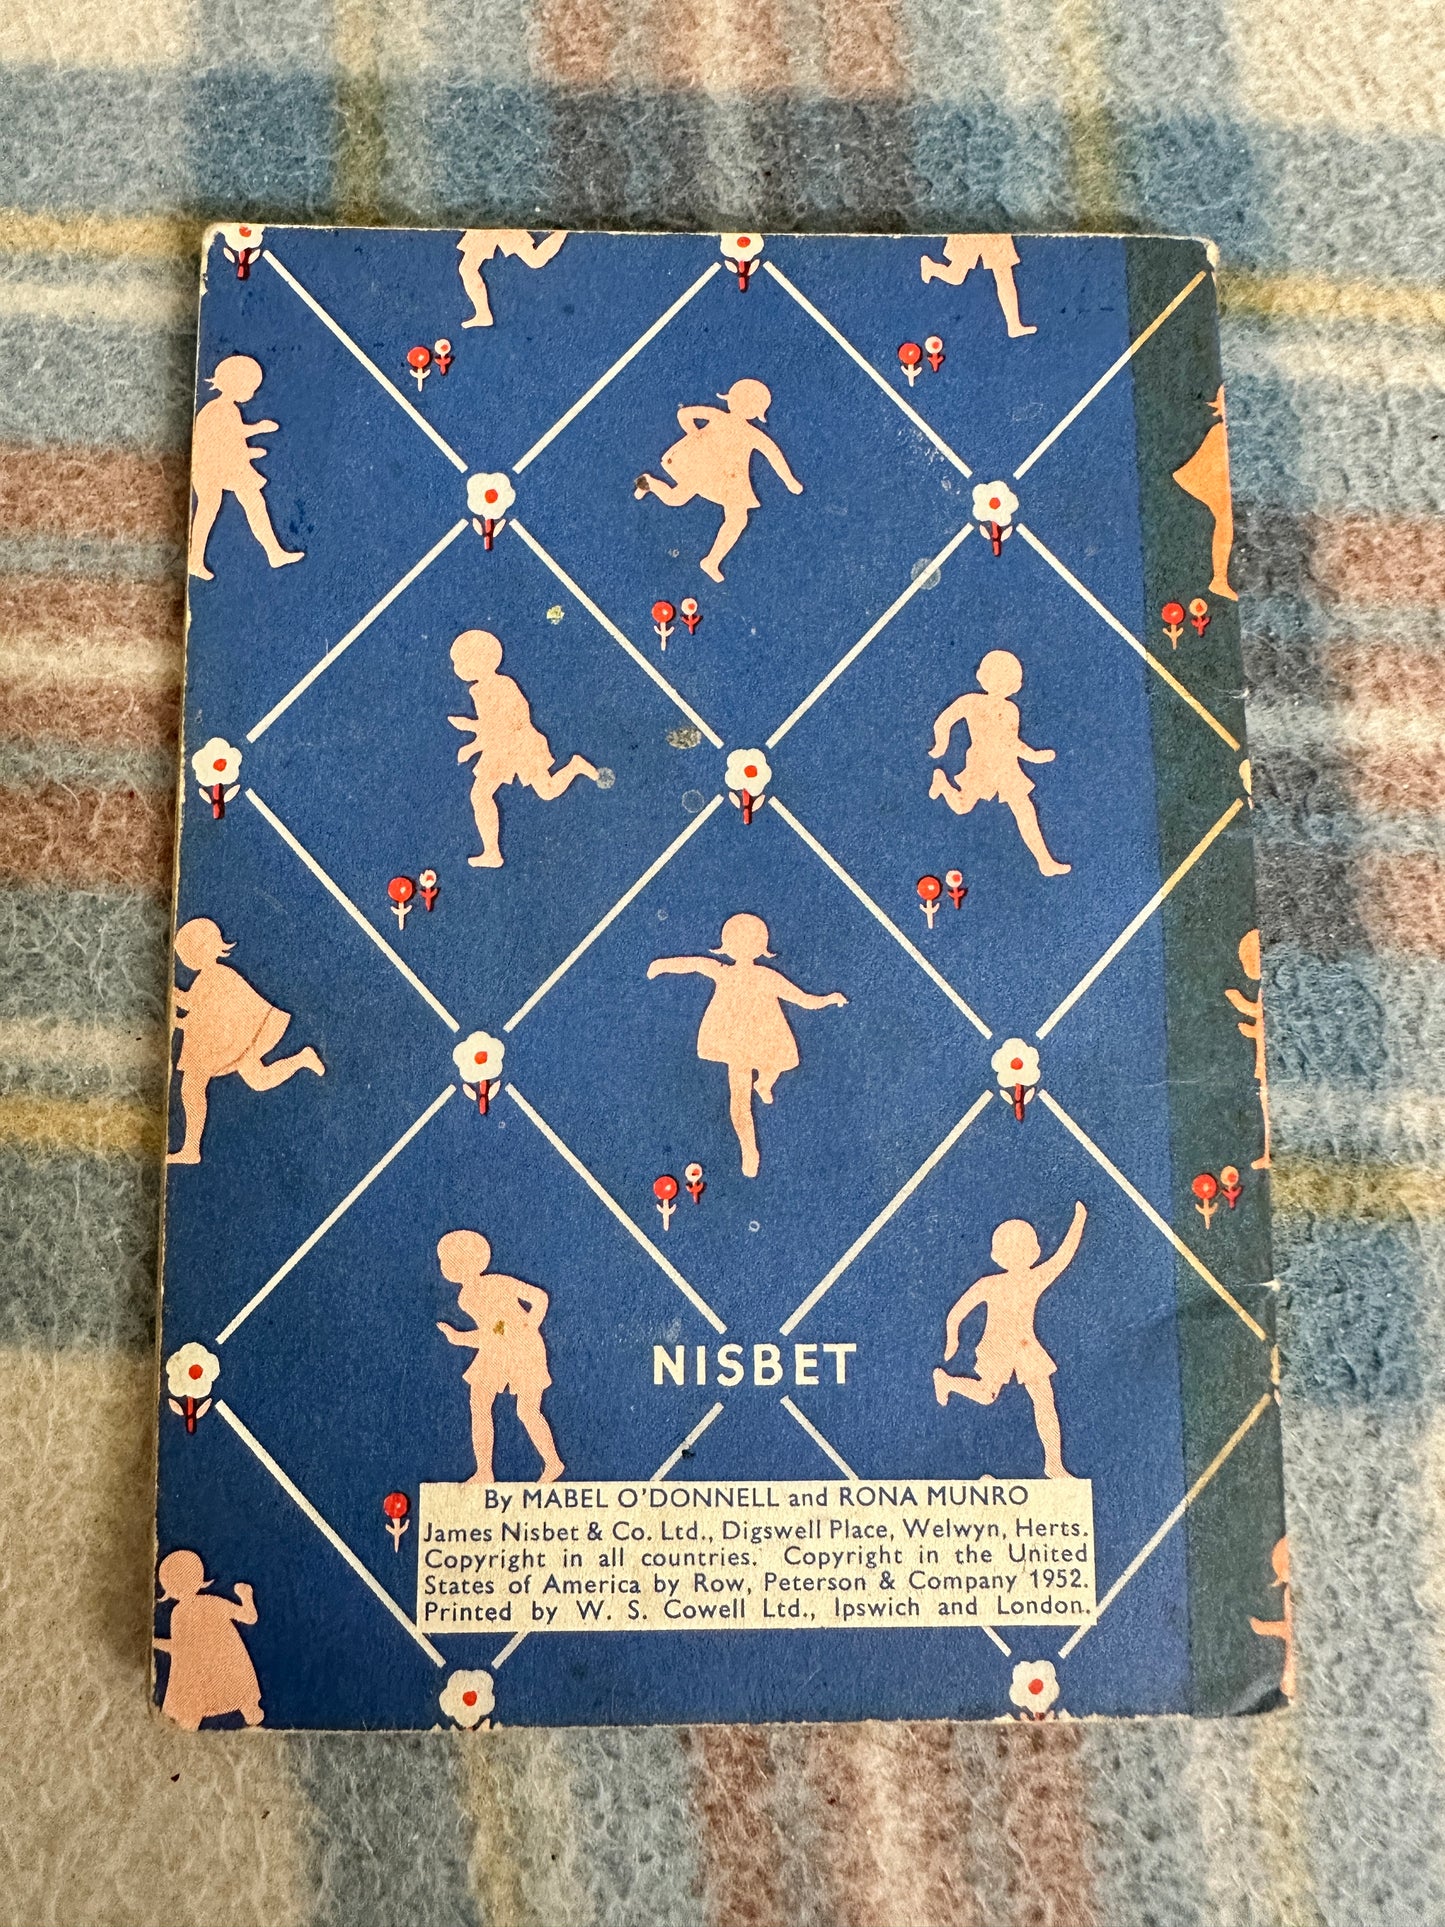 1952*1st* My Little Book 7 - Mabel O’Donnell & Rona Munro(James Nisbet & Co Ltd)